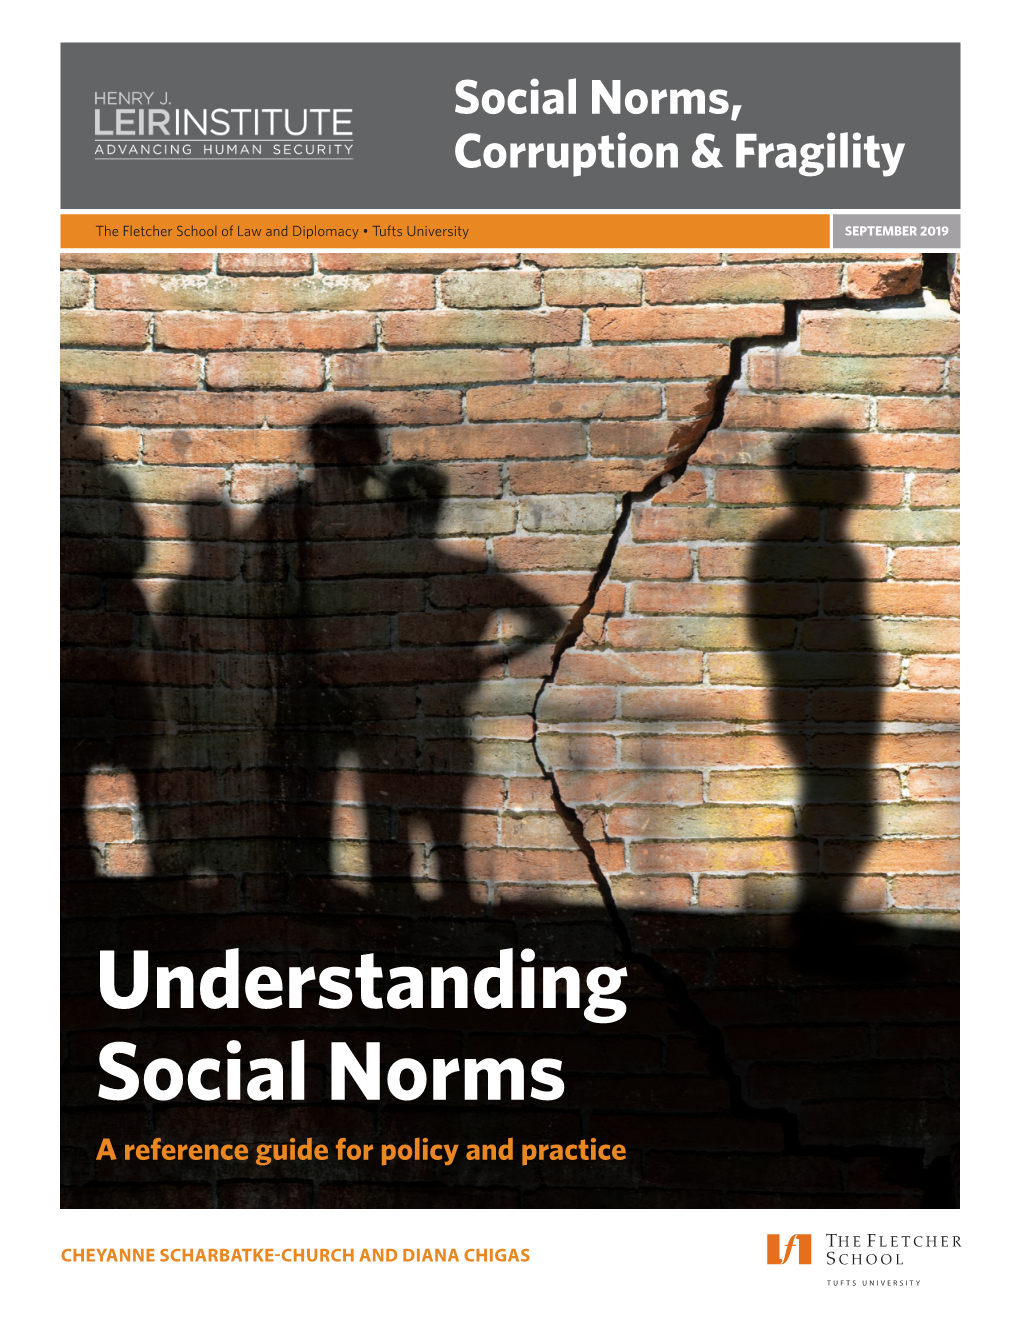 Understanding Social Norms a Reference Guide for Policy and Practice